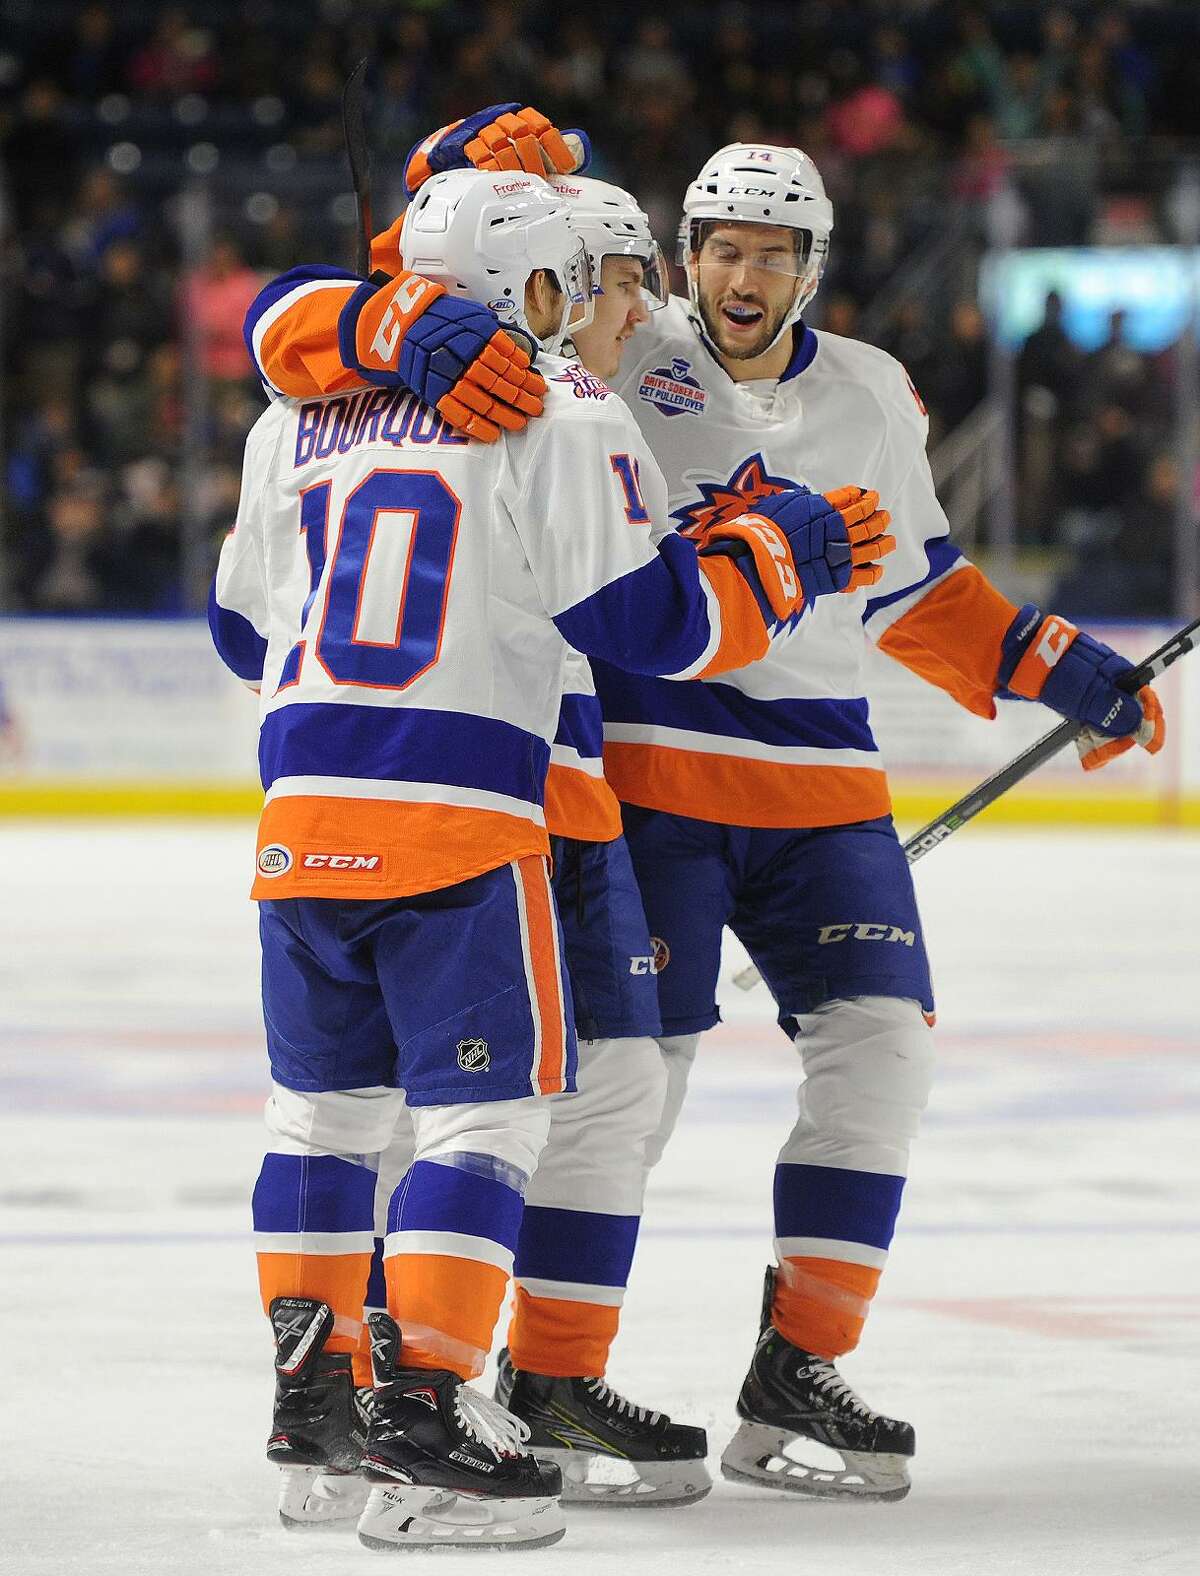 Bridgeport Sound Tiger players celebrate a first period goal by Sebastian Aho during their AHL hockey game with the Lehigh Valley Phantoms at the Webster Bank Arena in Bridgeport, Conn. on Wednesday, November 8, 2017.